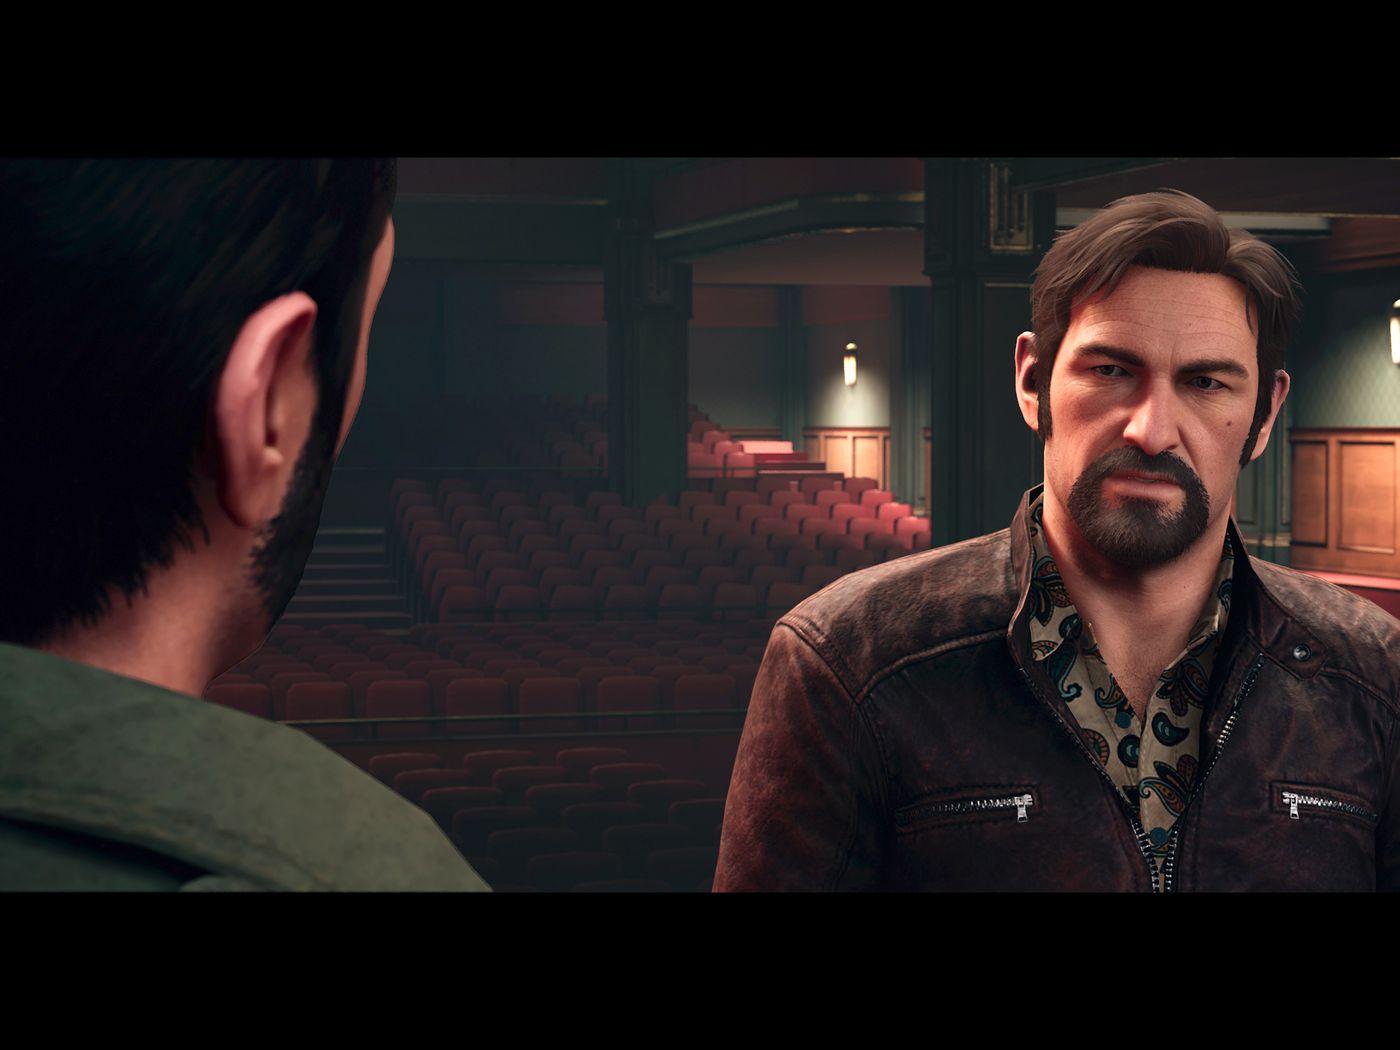 A Way Out's ending: was it worth it?